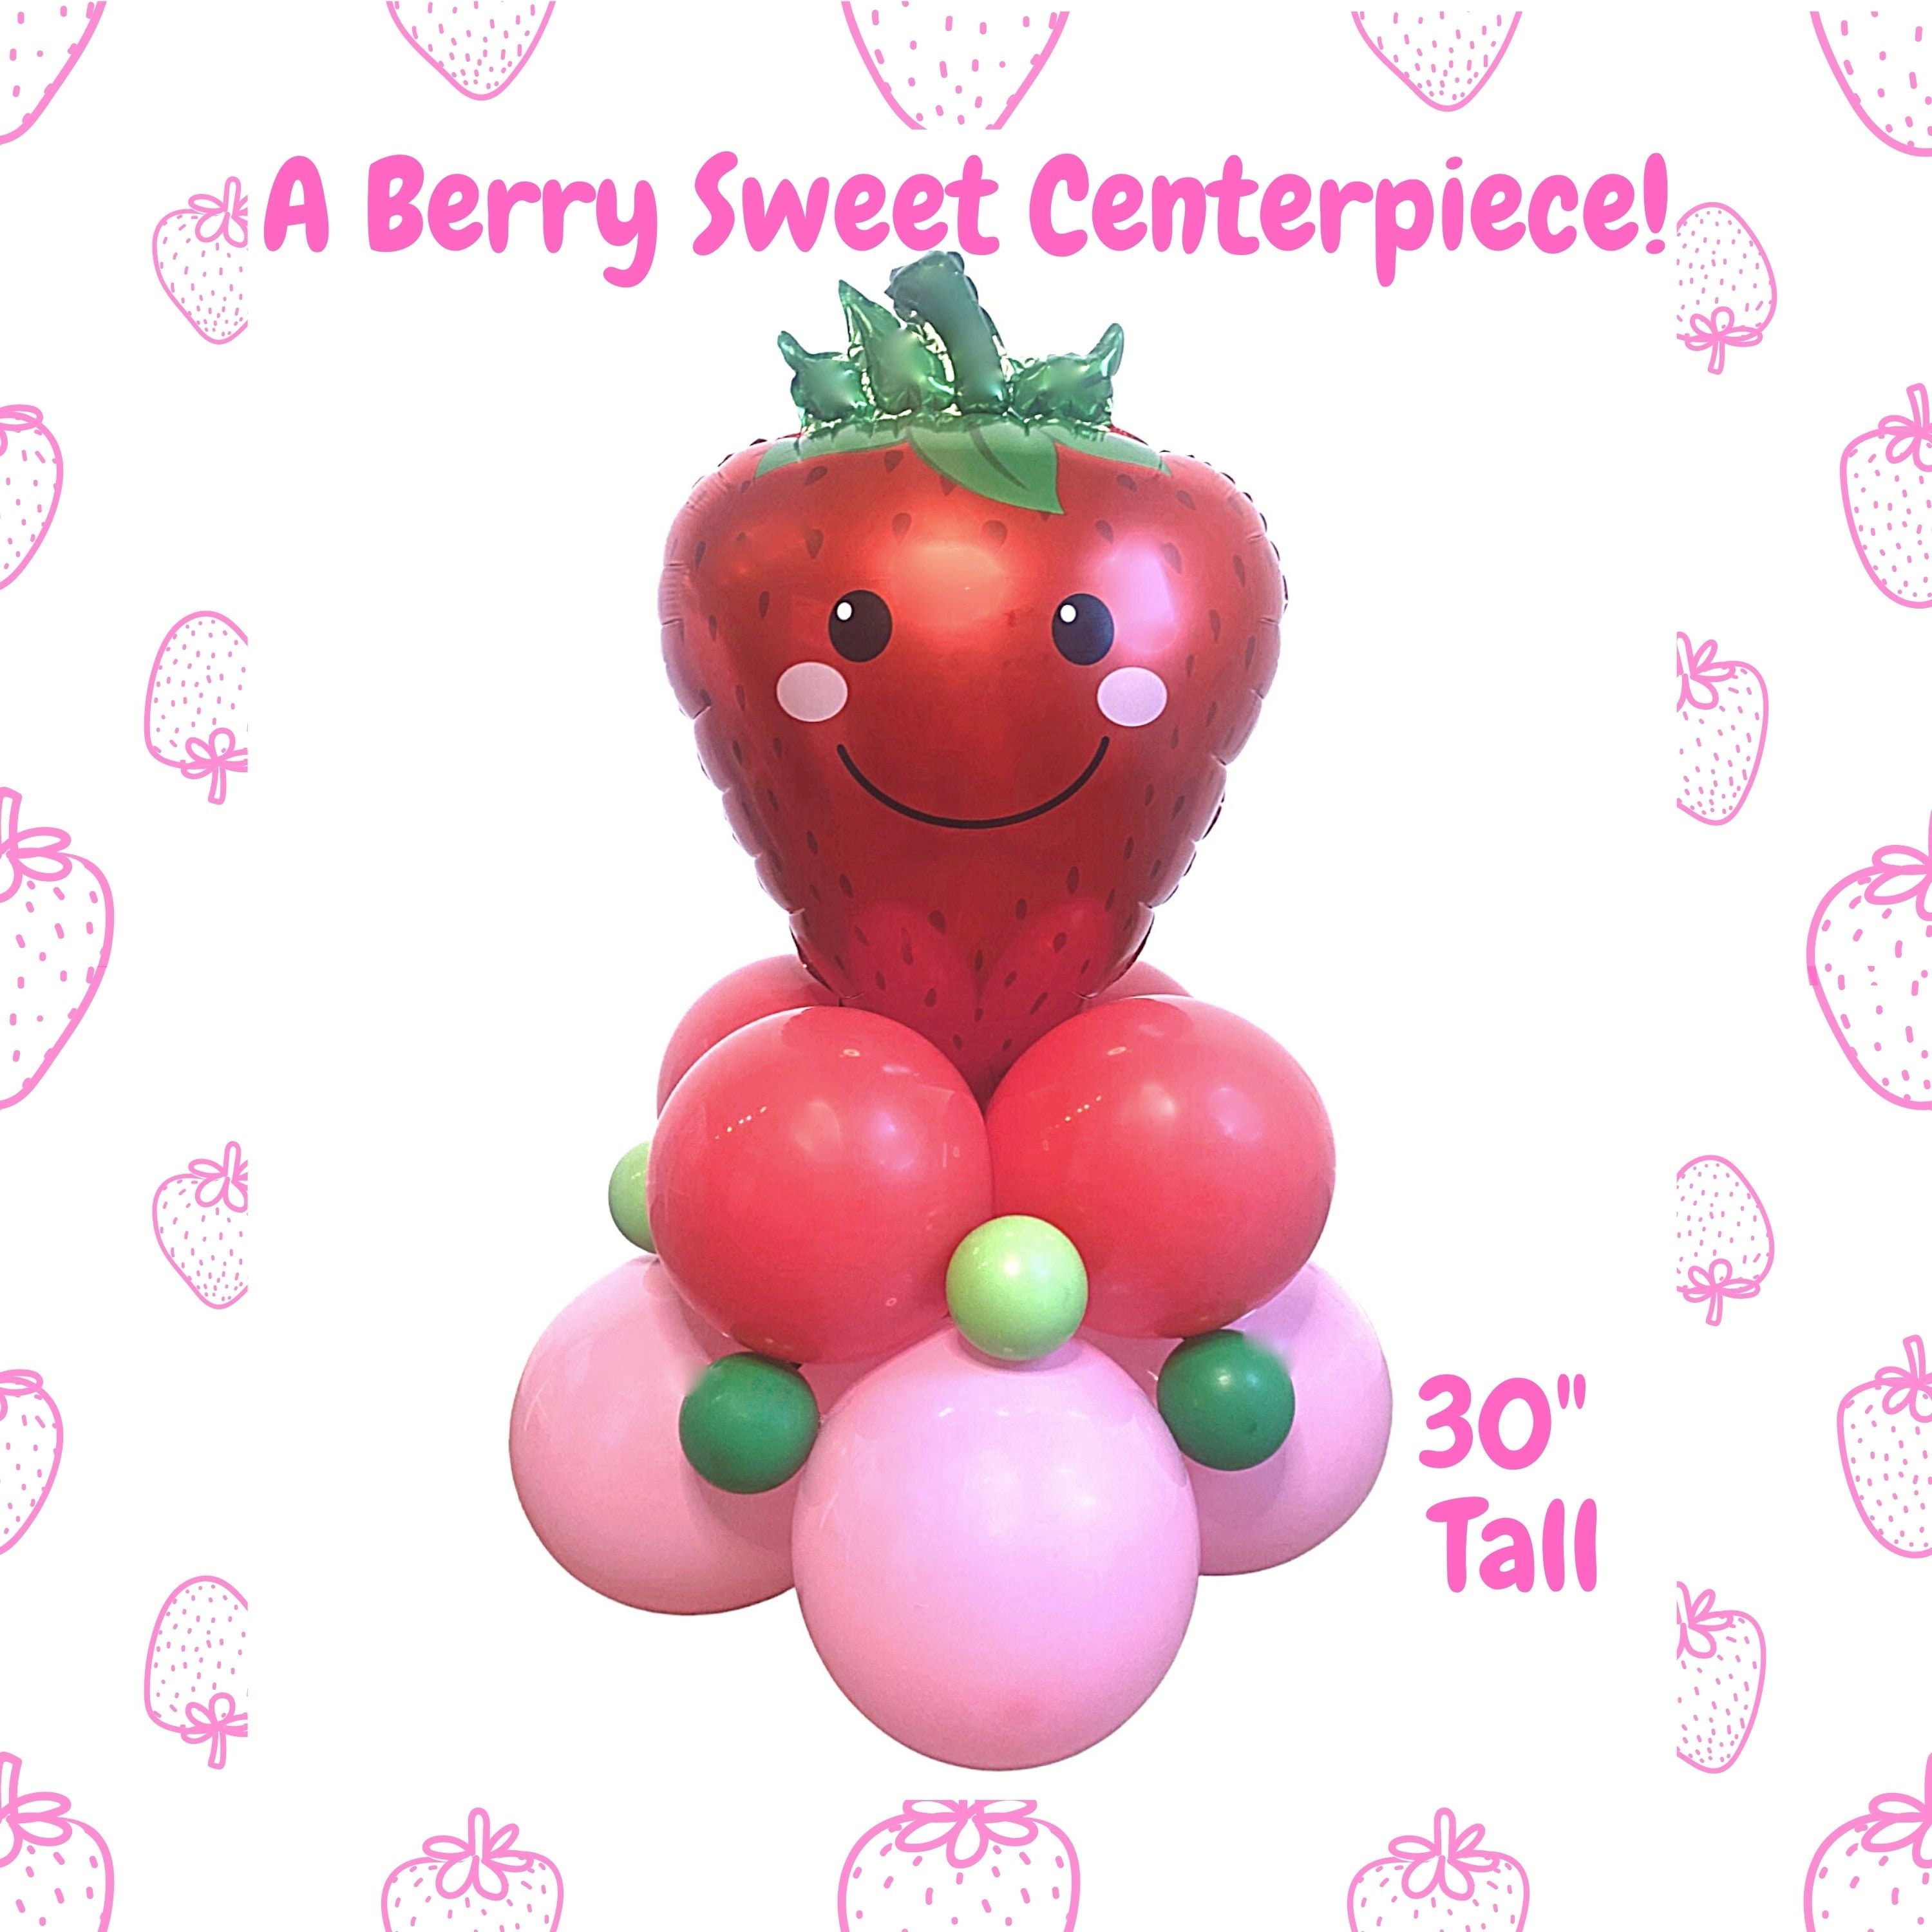 Pin The Tail Game,Print Strawberry Berry First 1st Birthday Party  Game,Berry Sweet Strawberry Party Decor Sign, Retro - AliExpress